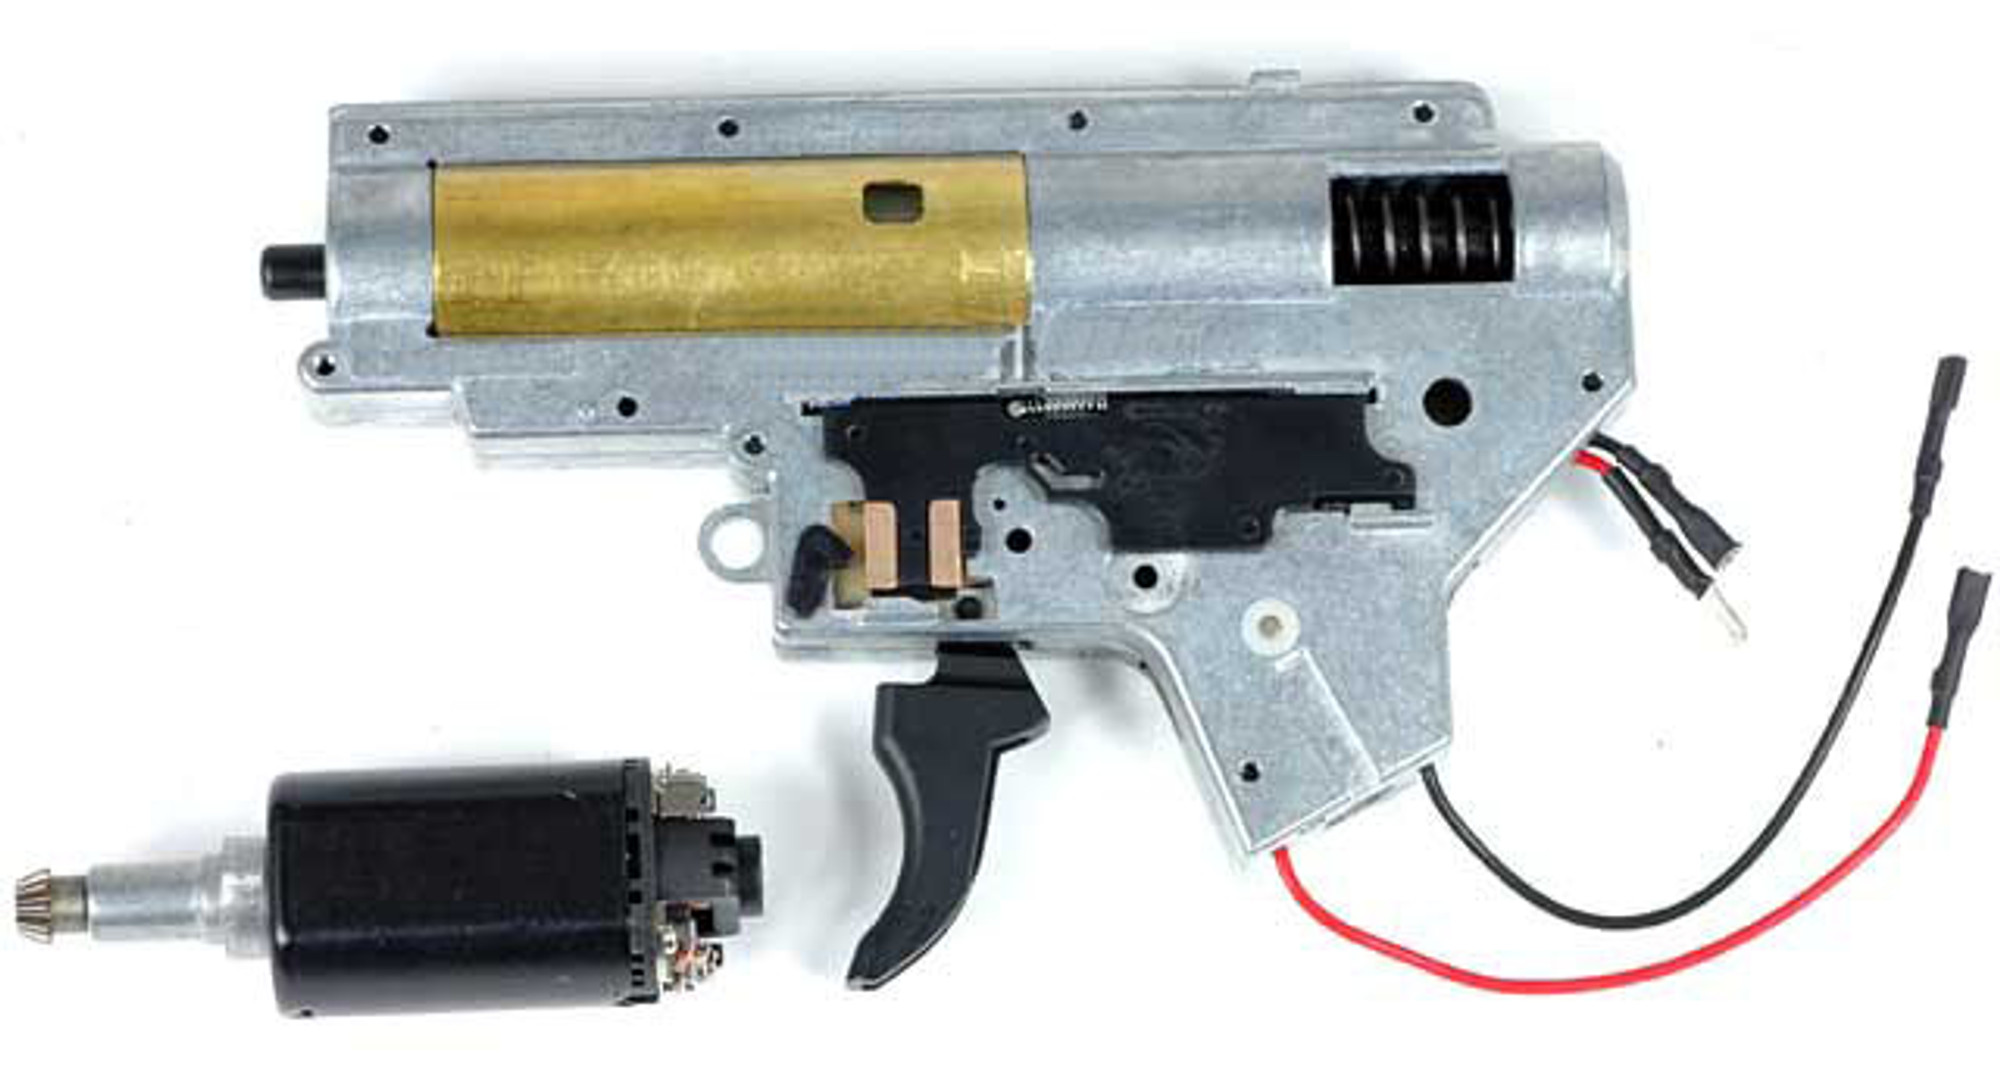 Complete JG / Echo1 Reinforced Full Metal Gearbox with Motor for G3 Series Airsoft AEG Rifle